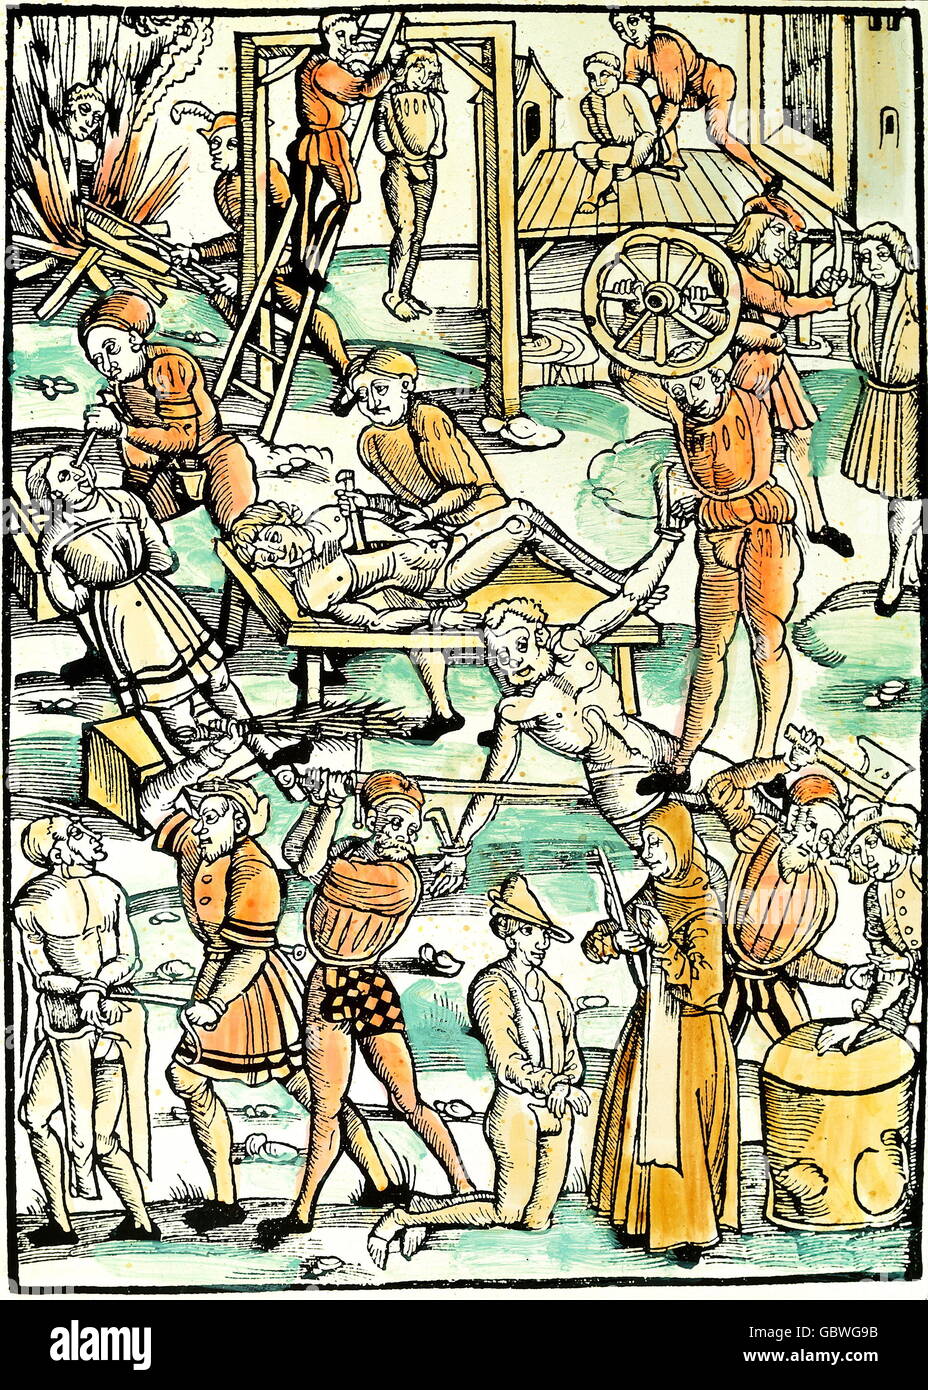 justice, penitentiary system, different types of penalty, coloured woodcut from 'Laienspiegel' by Ulrich Tengler, printed by Johann Schoeffer, Mainz, 1508, private collection, Additional-Rights-Clearences-Not Available Stock Photo